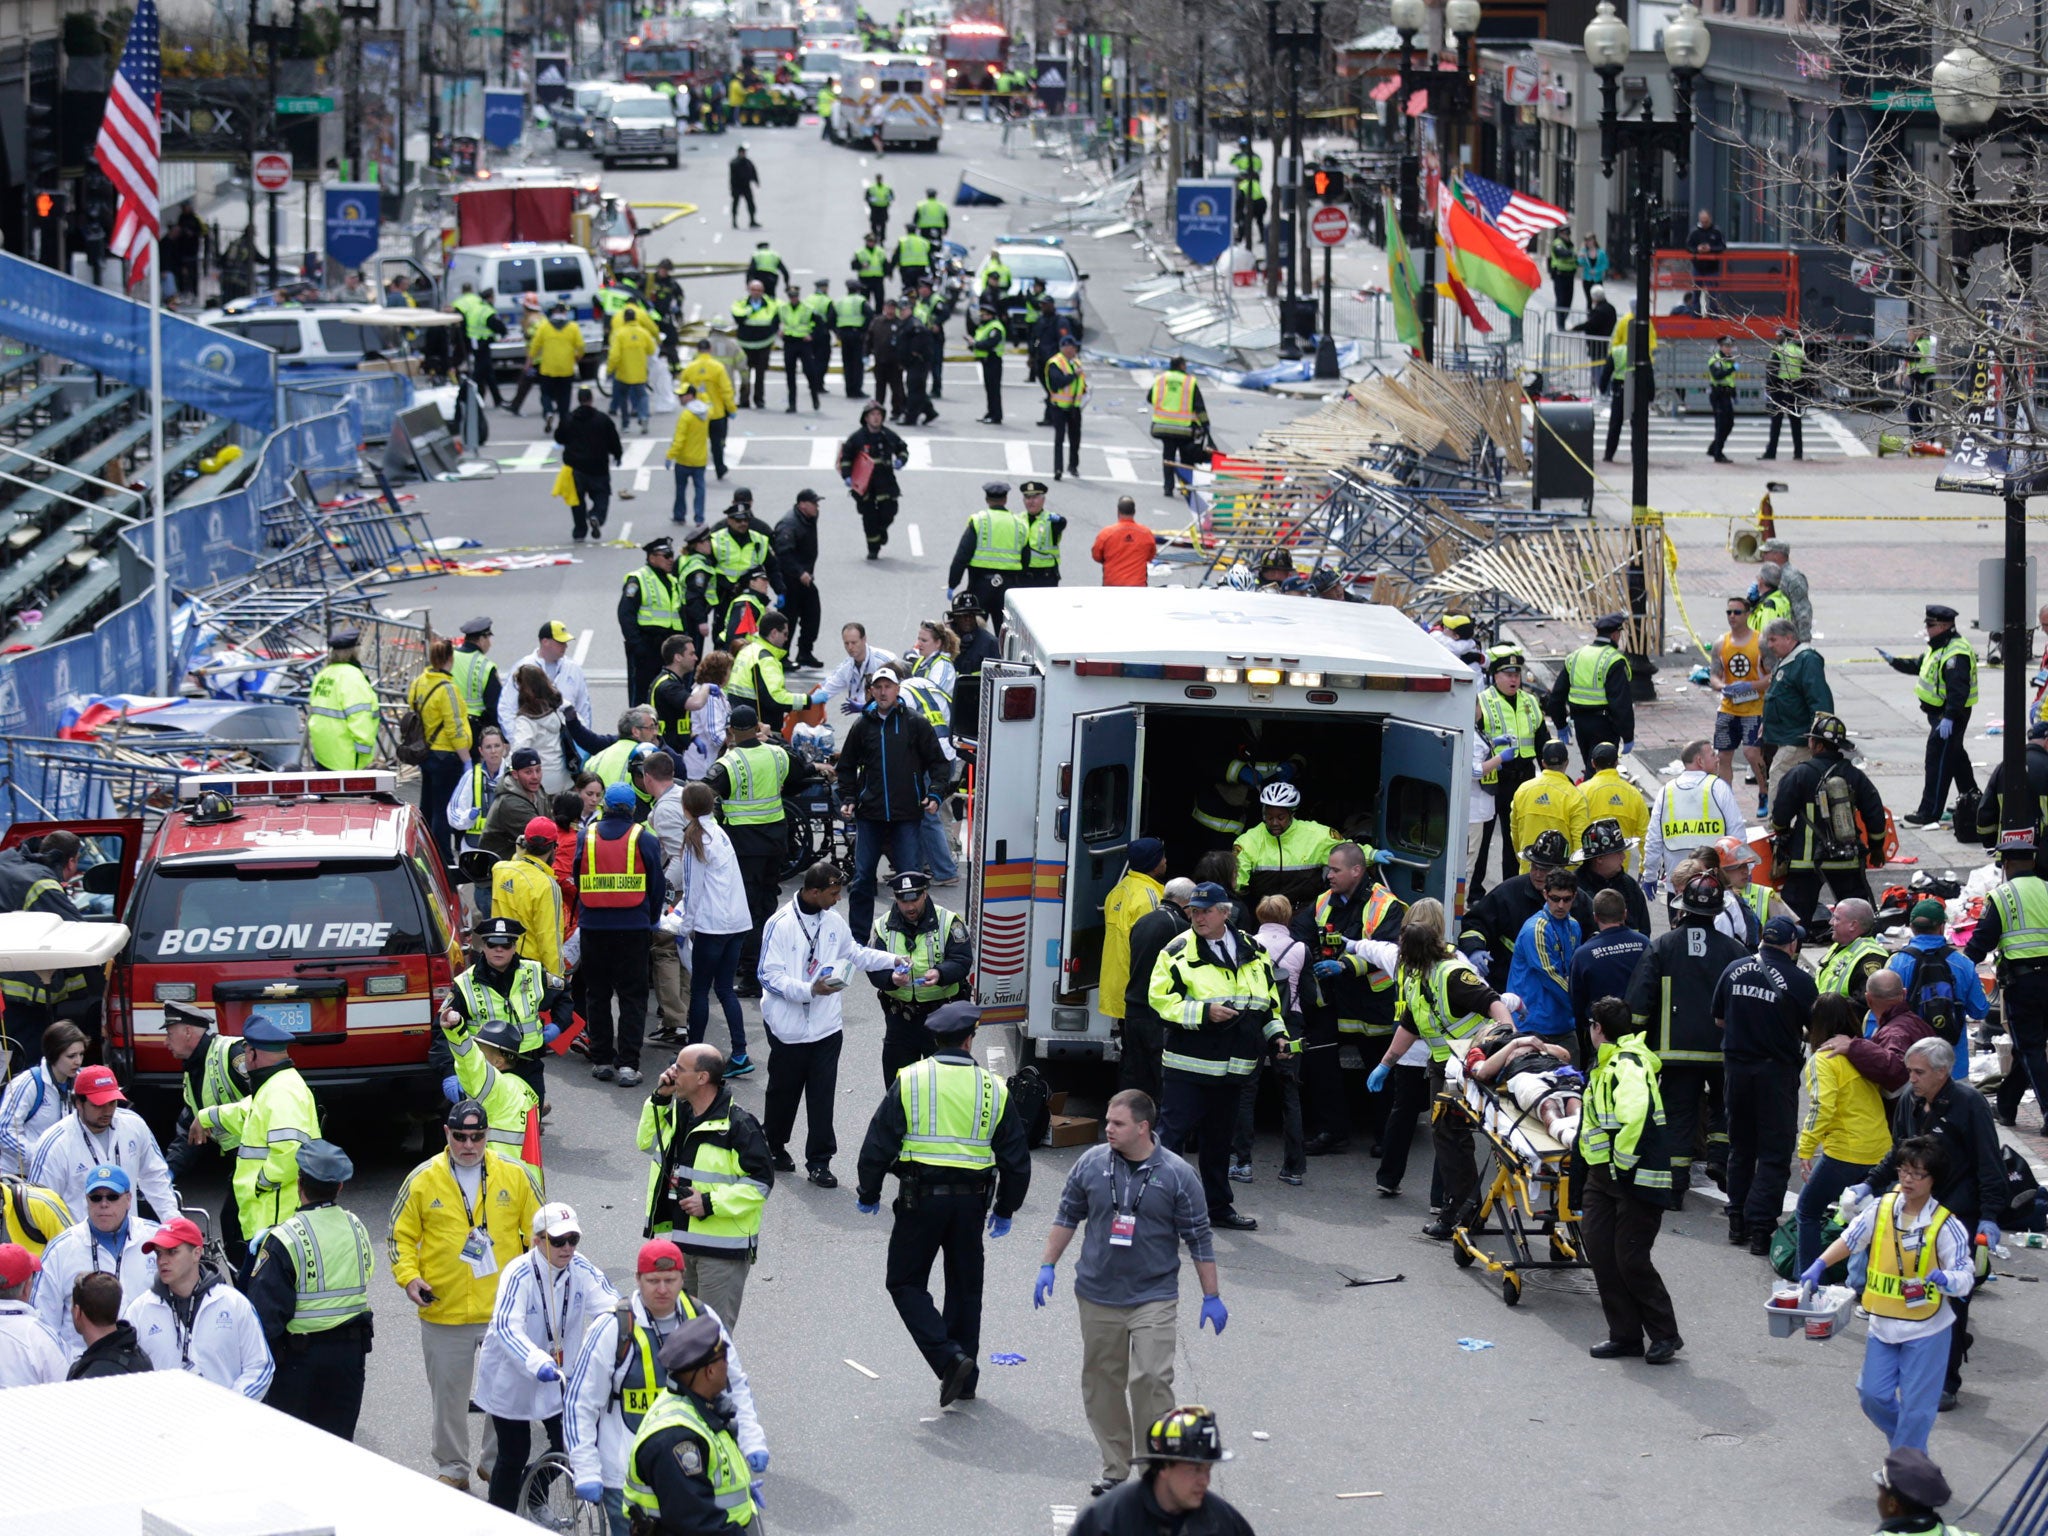 The study assessed the mental health impacts of reporting on the Boston Marathon bombing